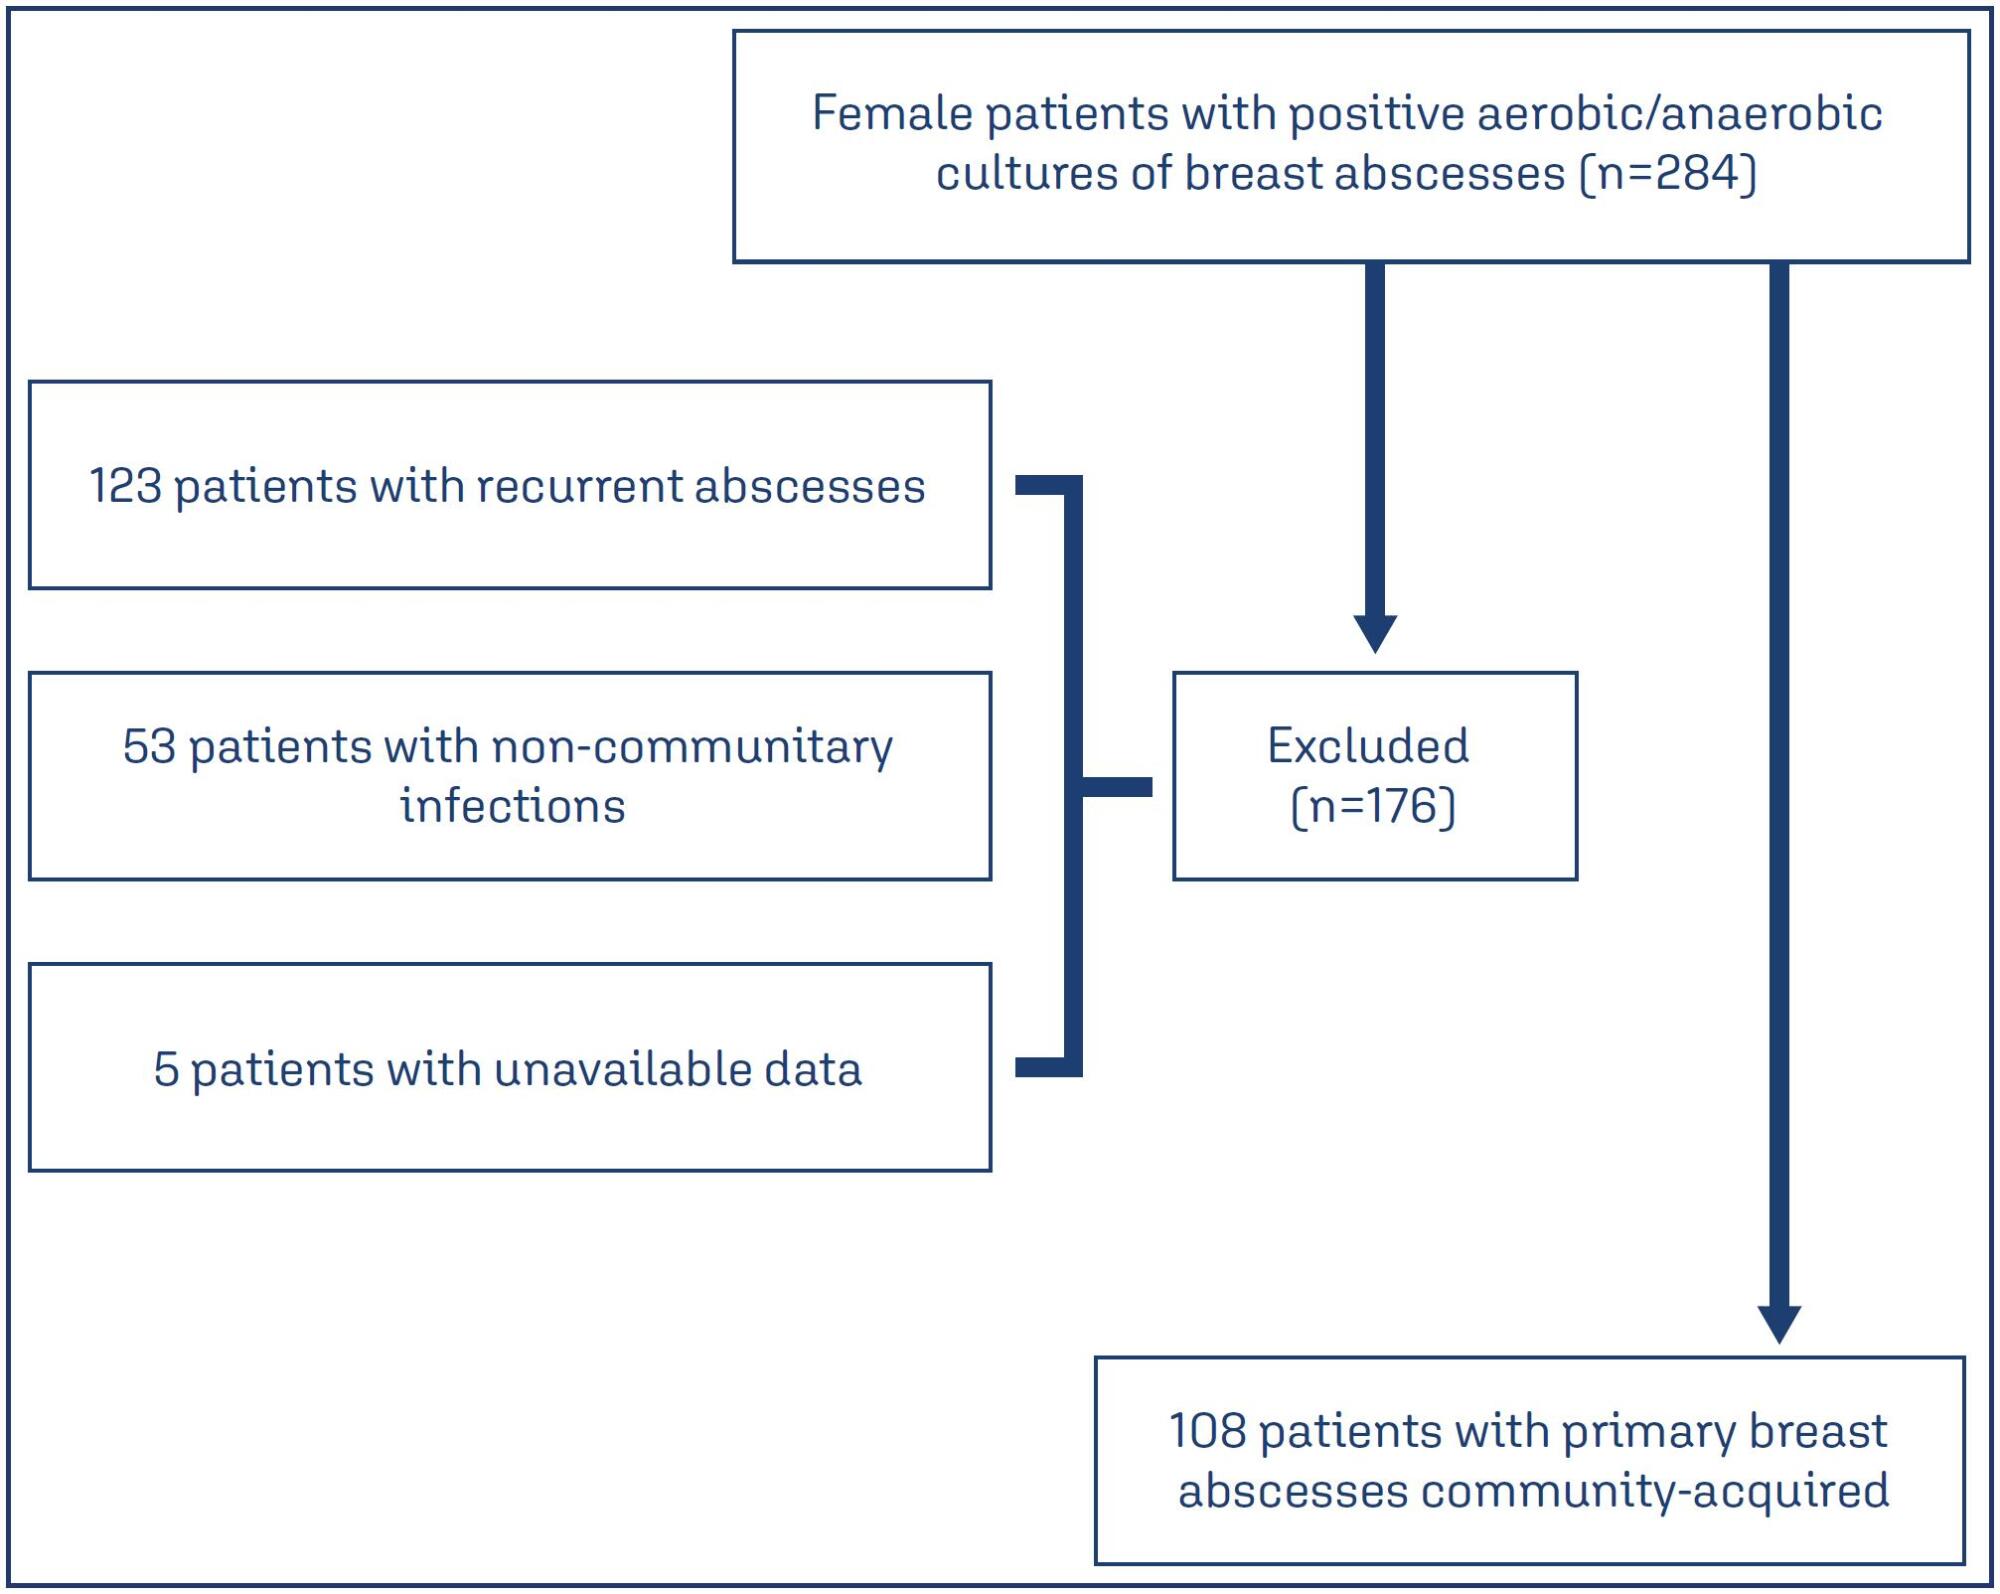 Bacteriological characteristics of primary breast abscesses in patients from the community in the era of microbial resistance